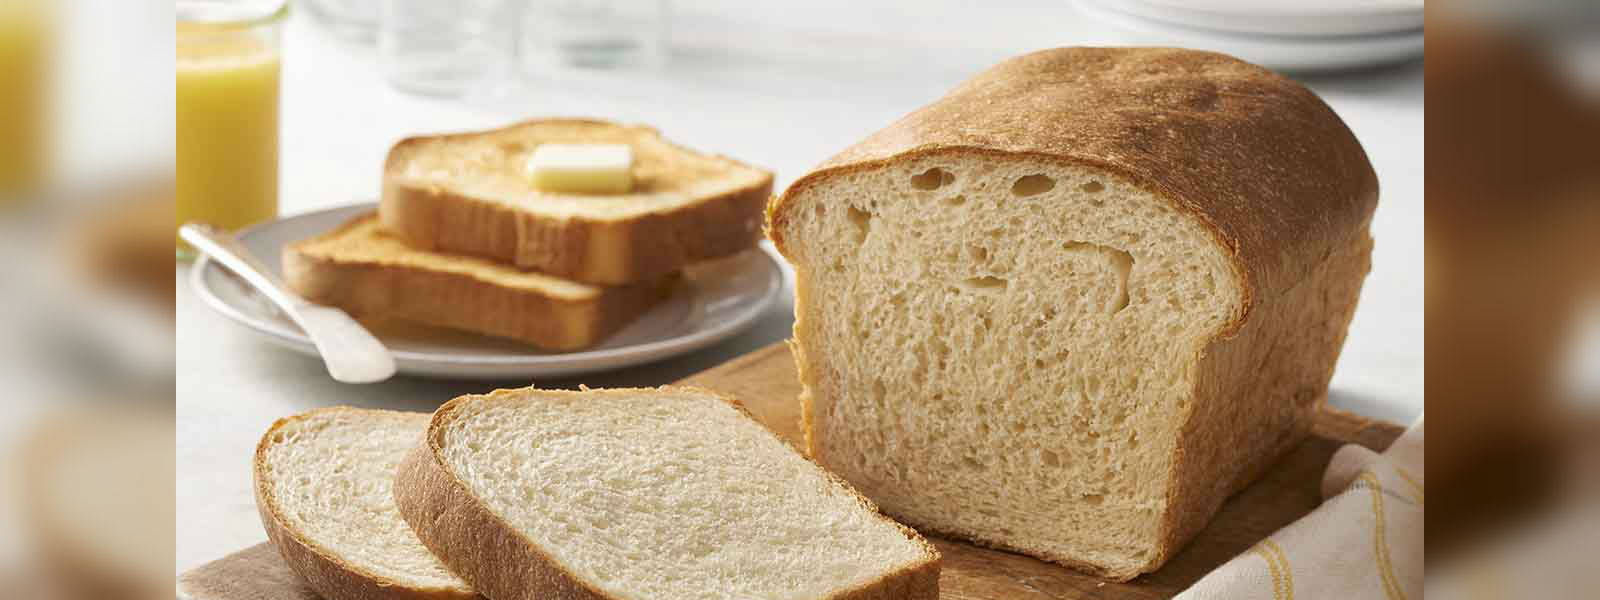 Bread prices increased – Bakery Owners